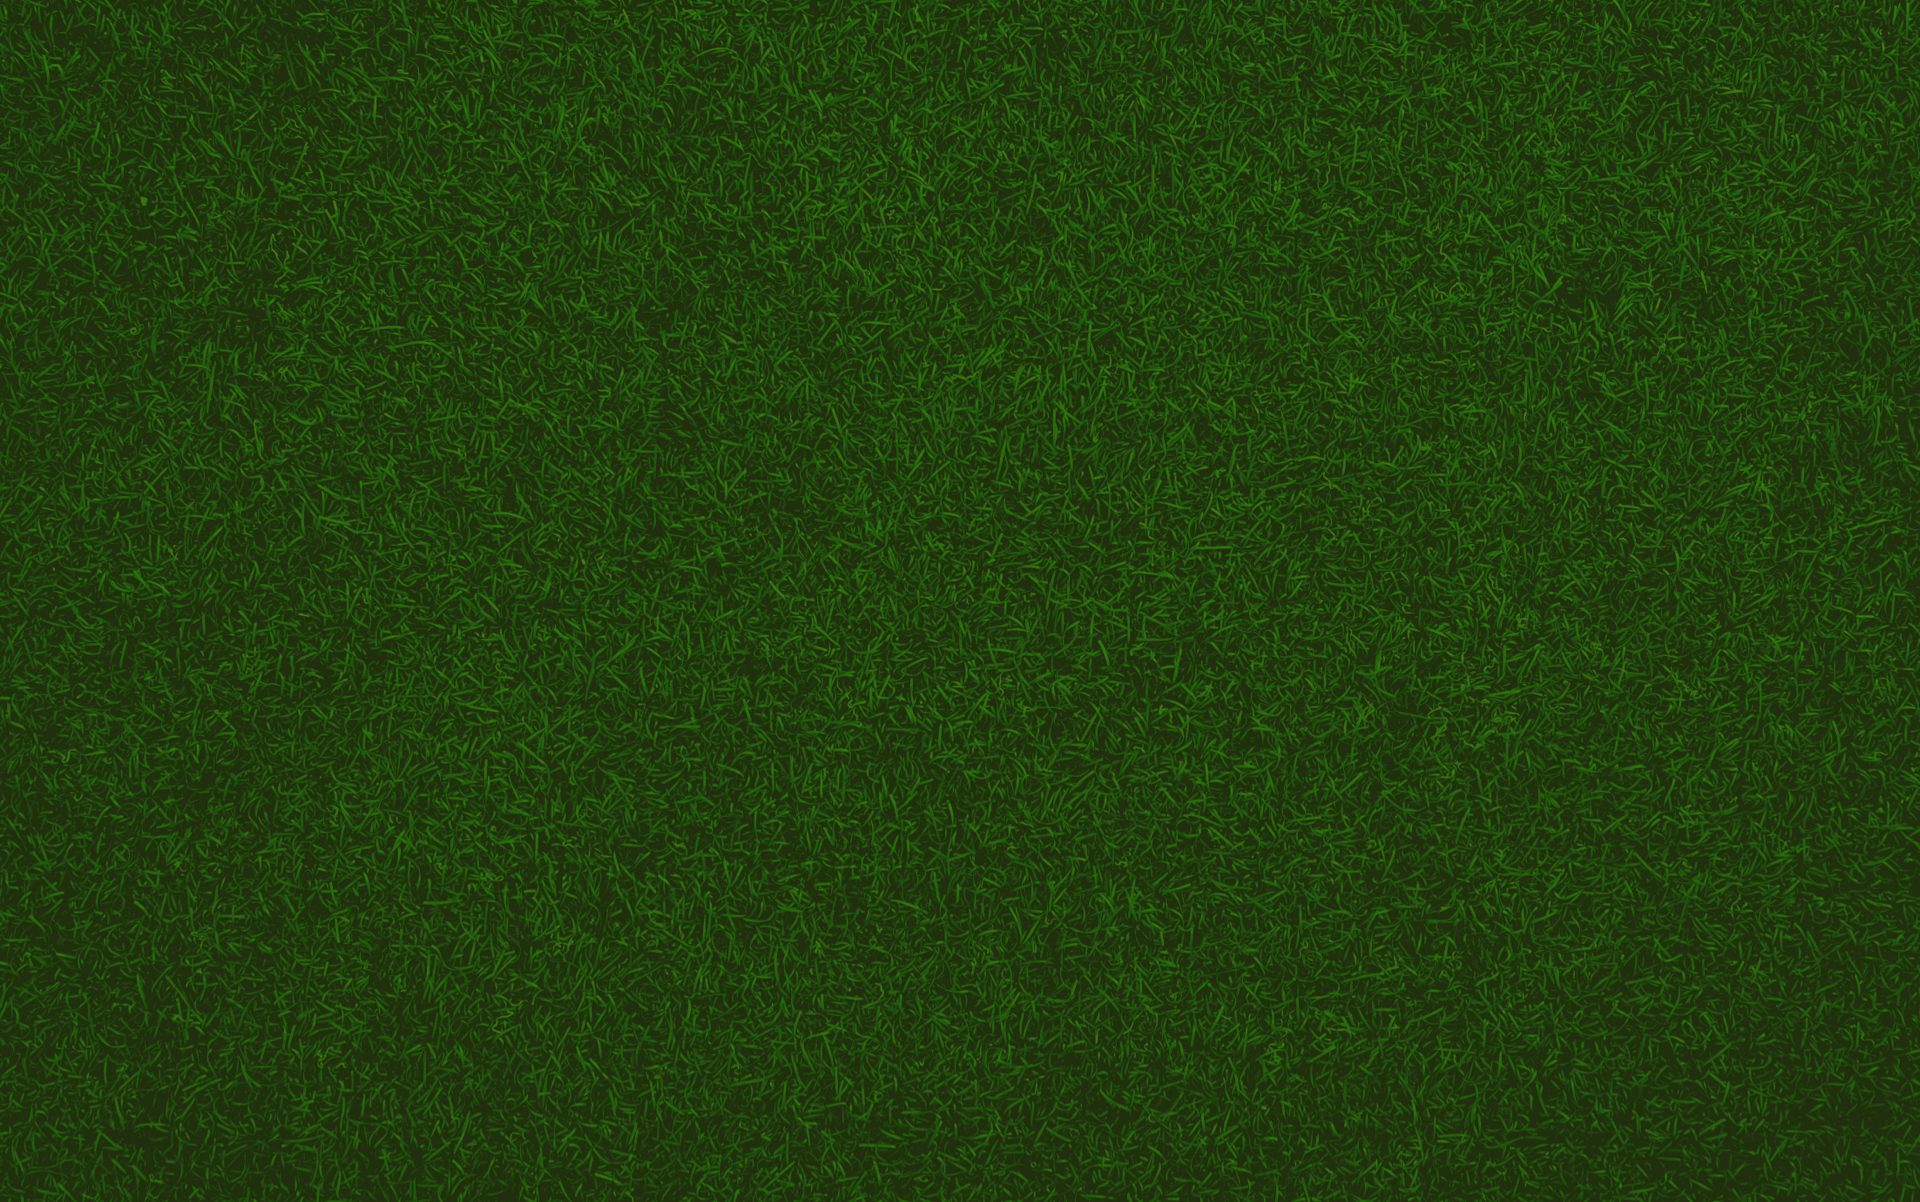 Green grass from above